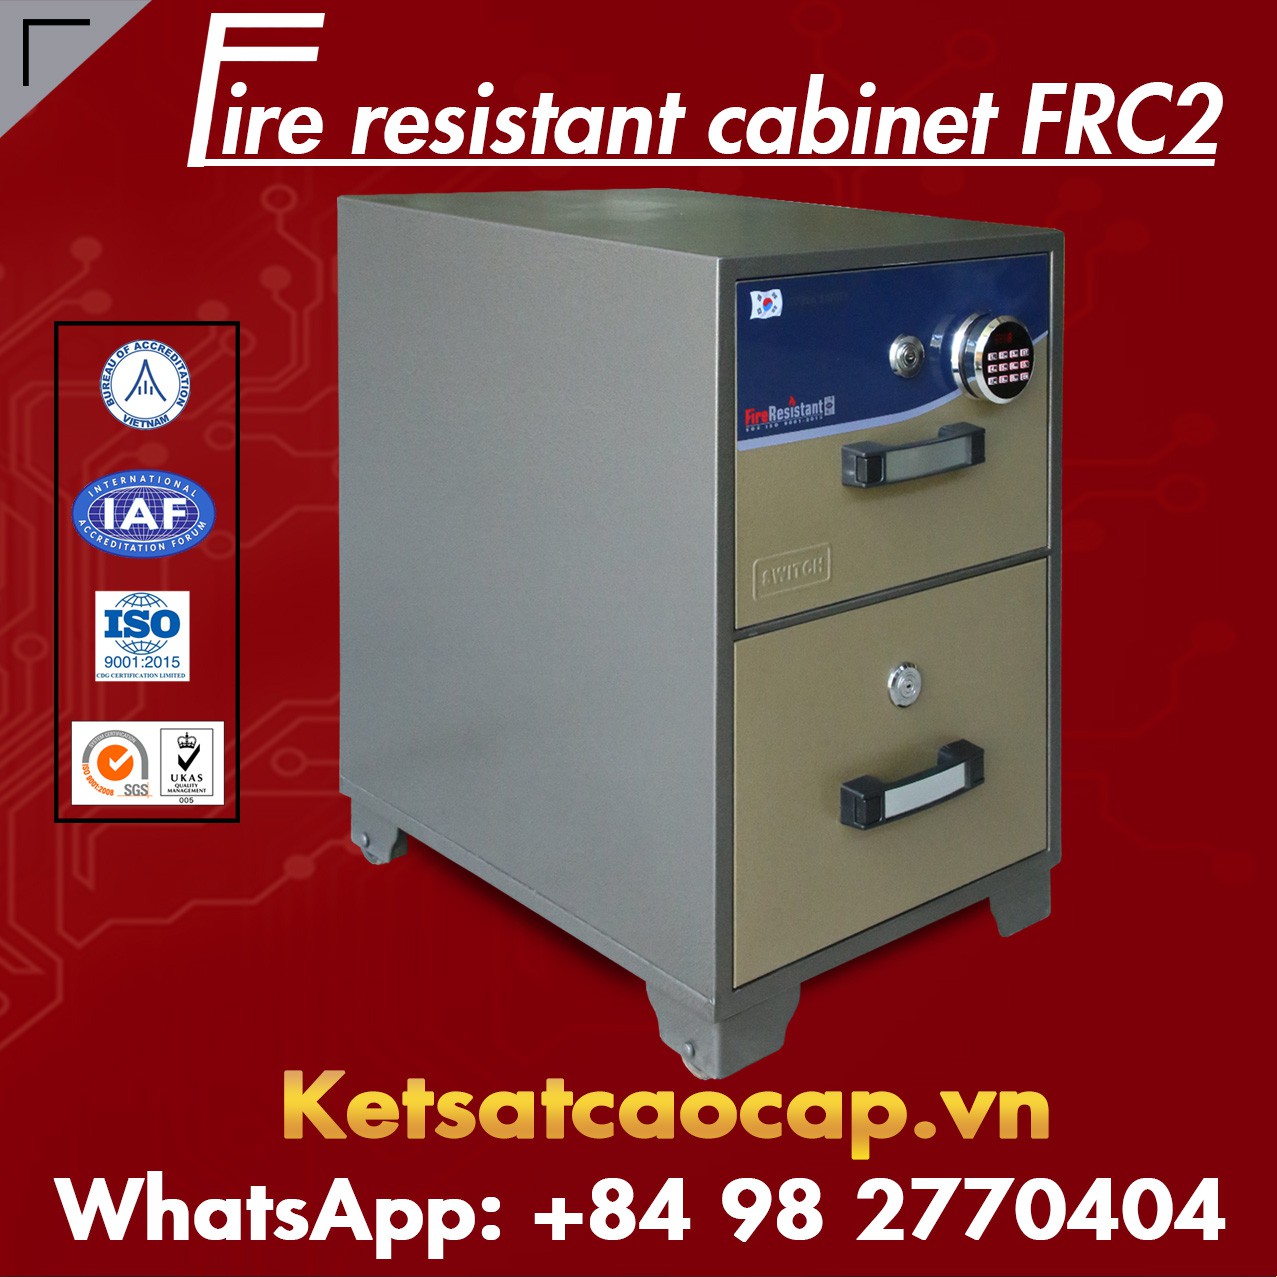 Protect Documents with Fireproof Filing Cabinets